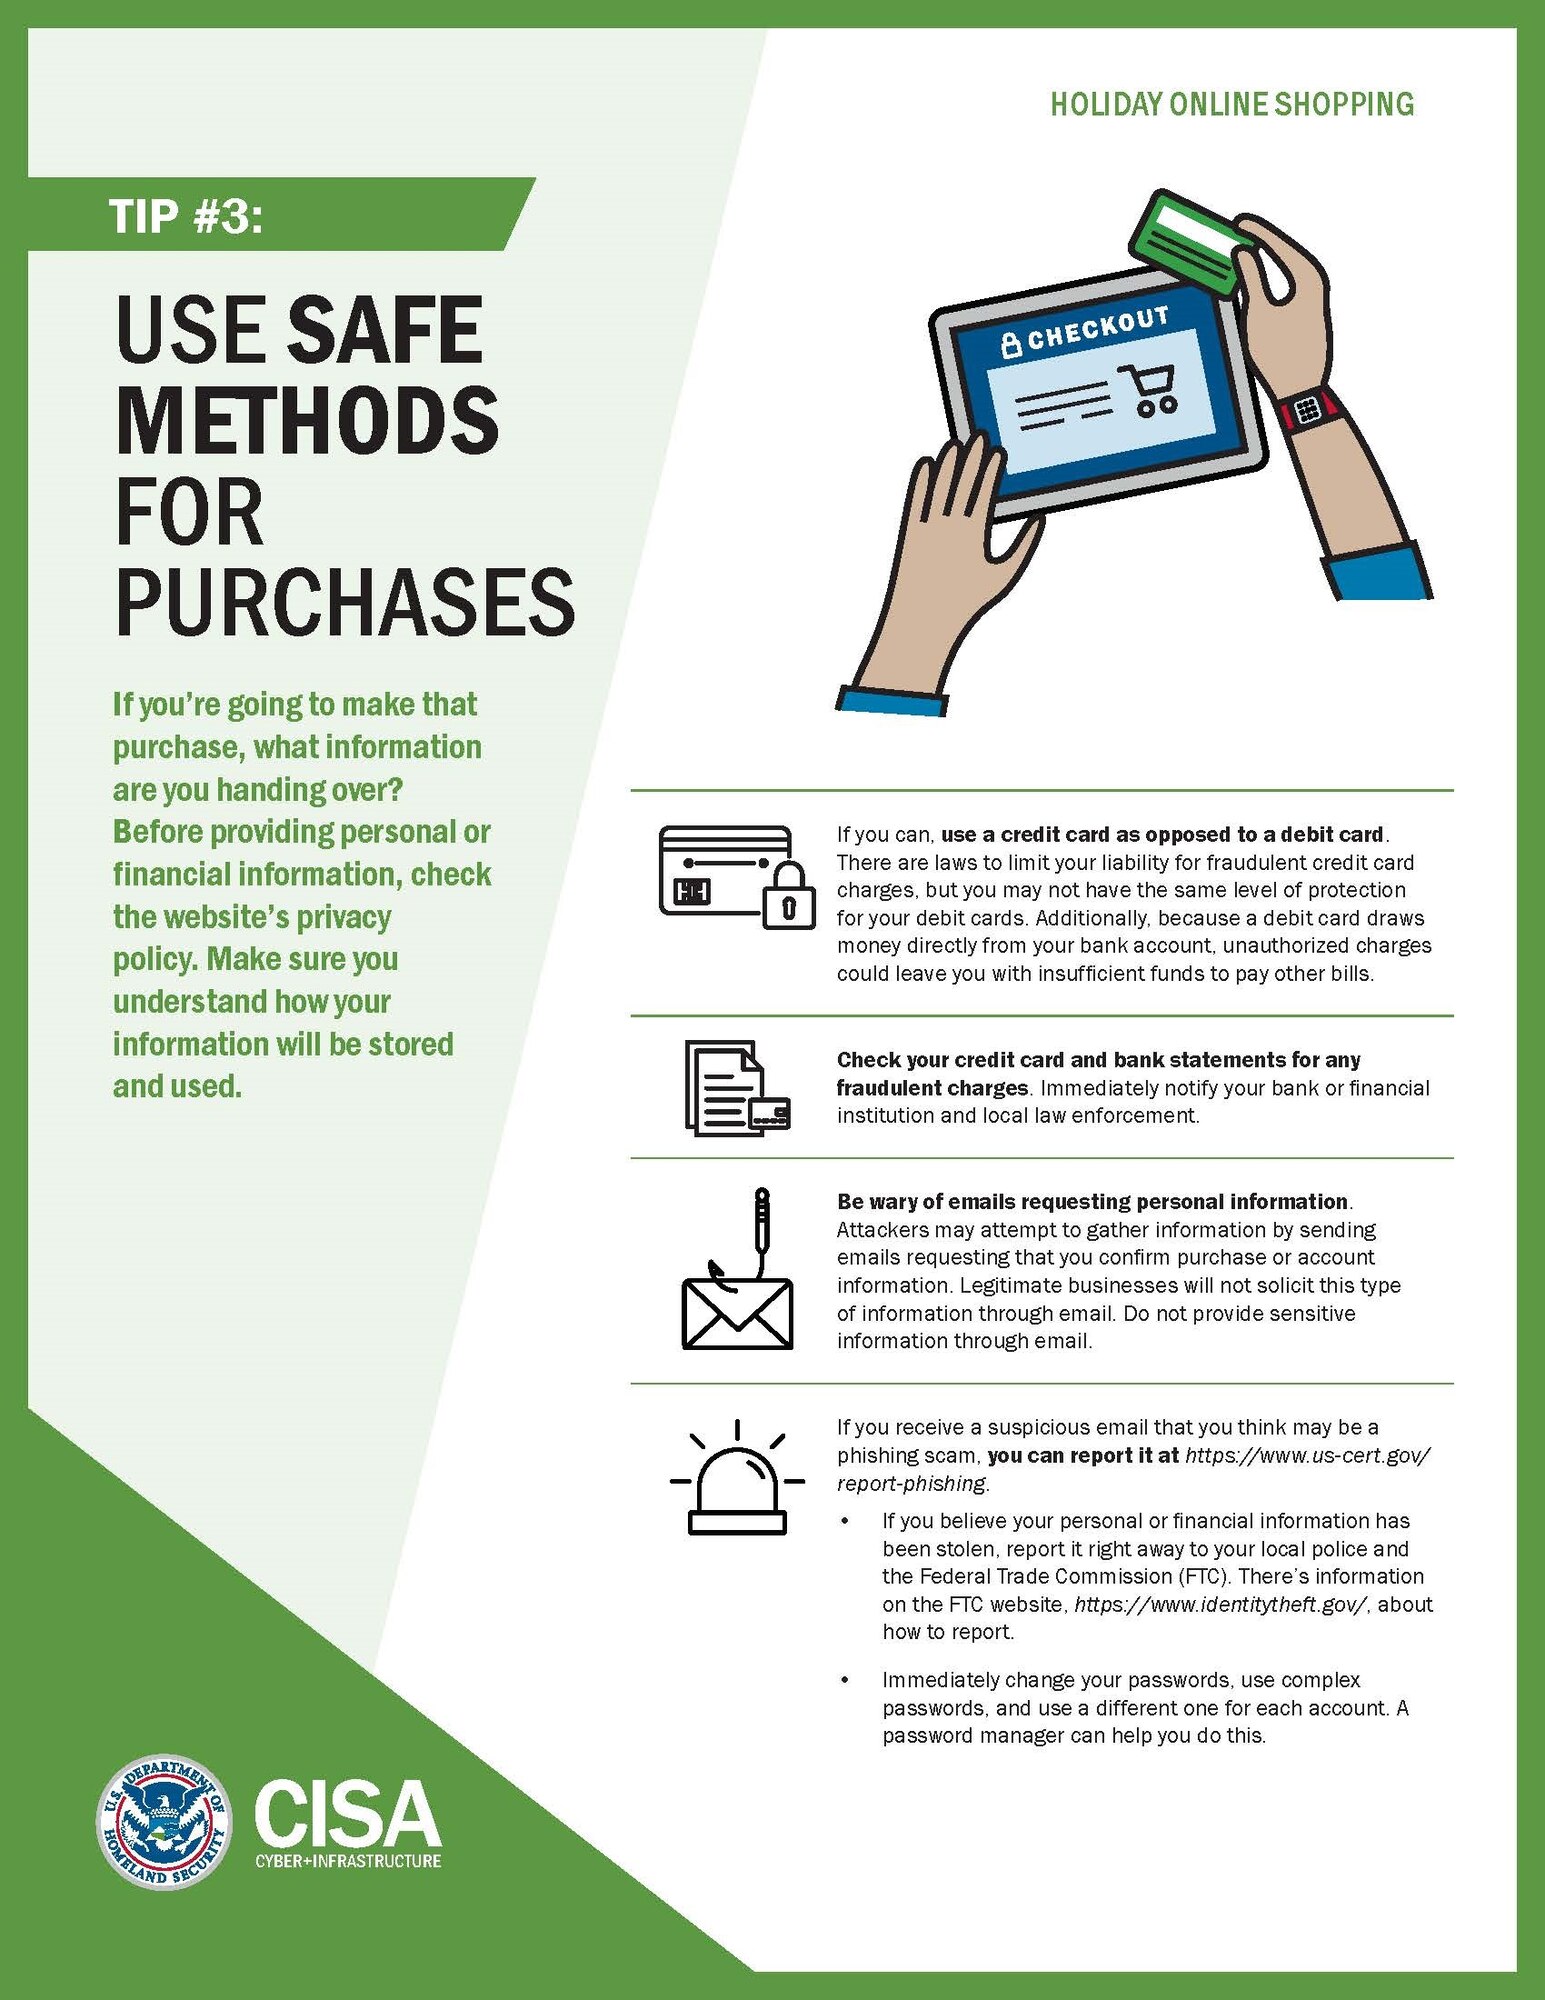 Tip No. 3: Use safe methods for purchases. If you're going to make that purchase, what information are you handing over?